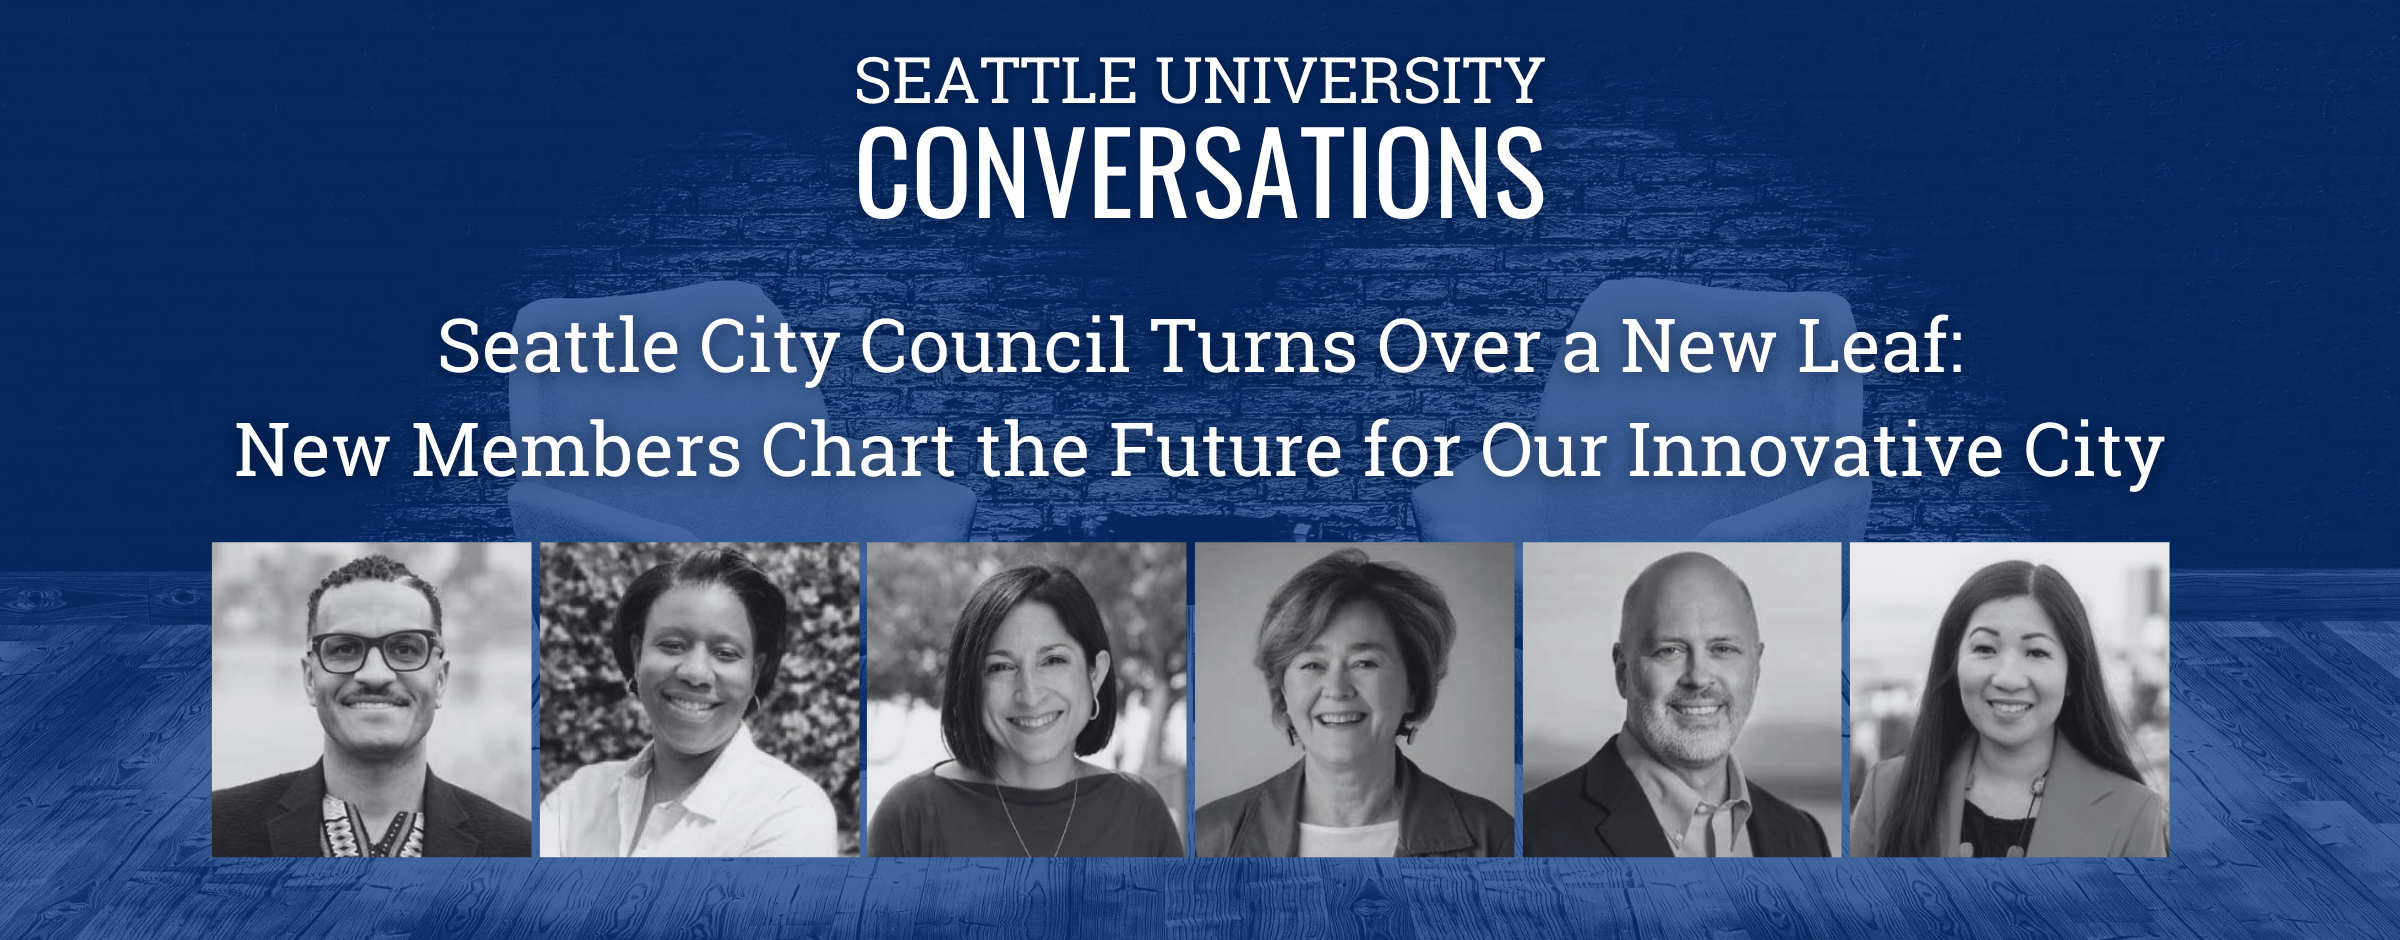 Conversations -Turning Over a New Leaf with New City Council Members